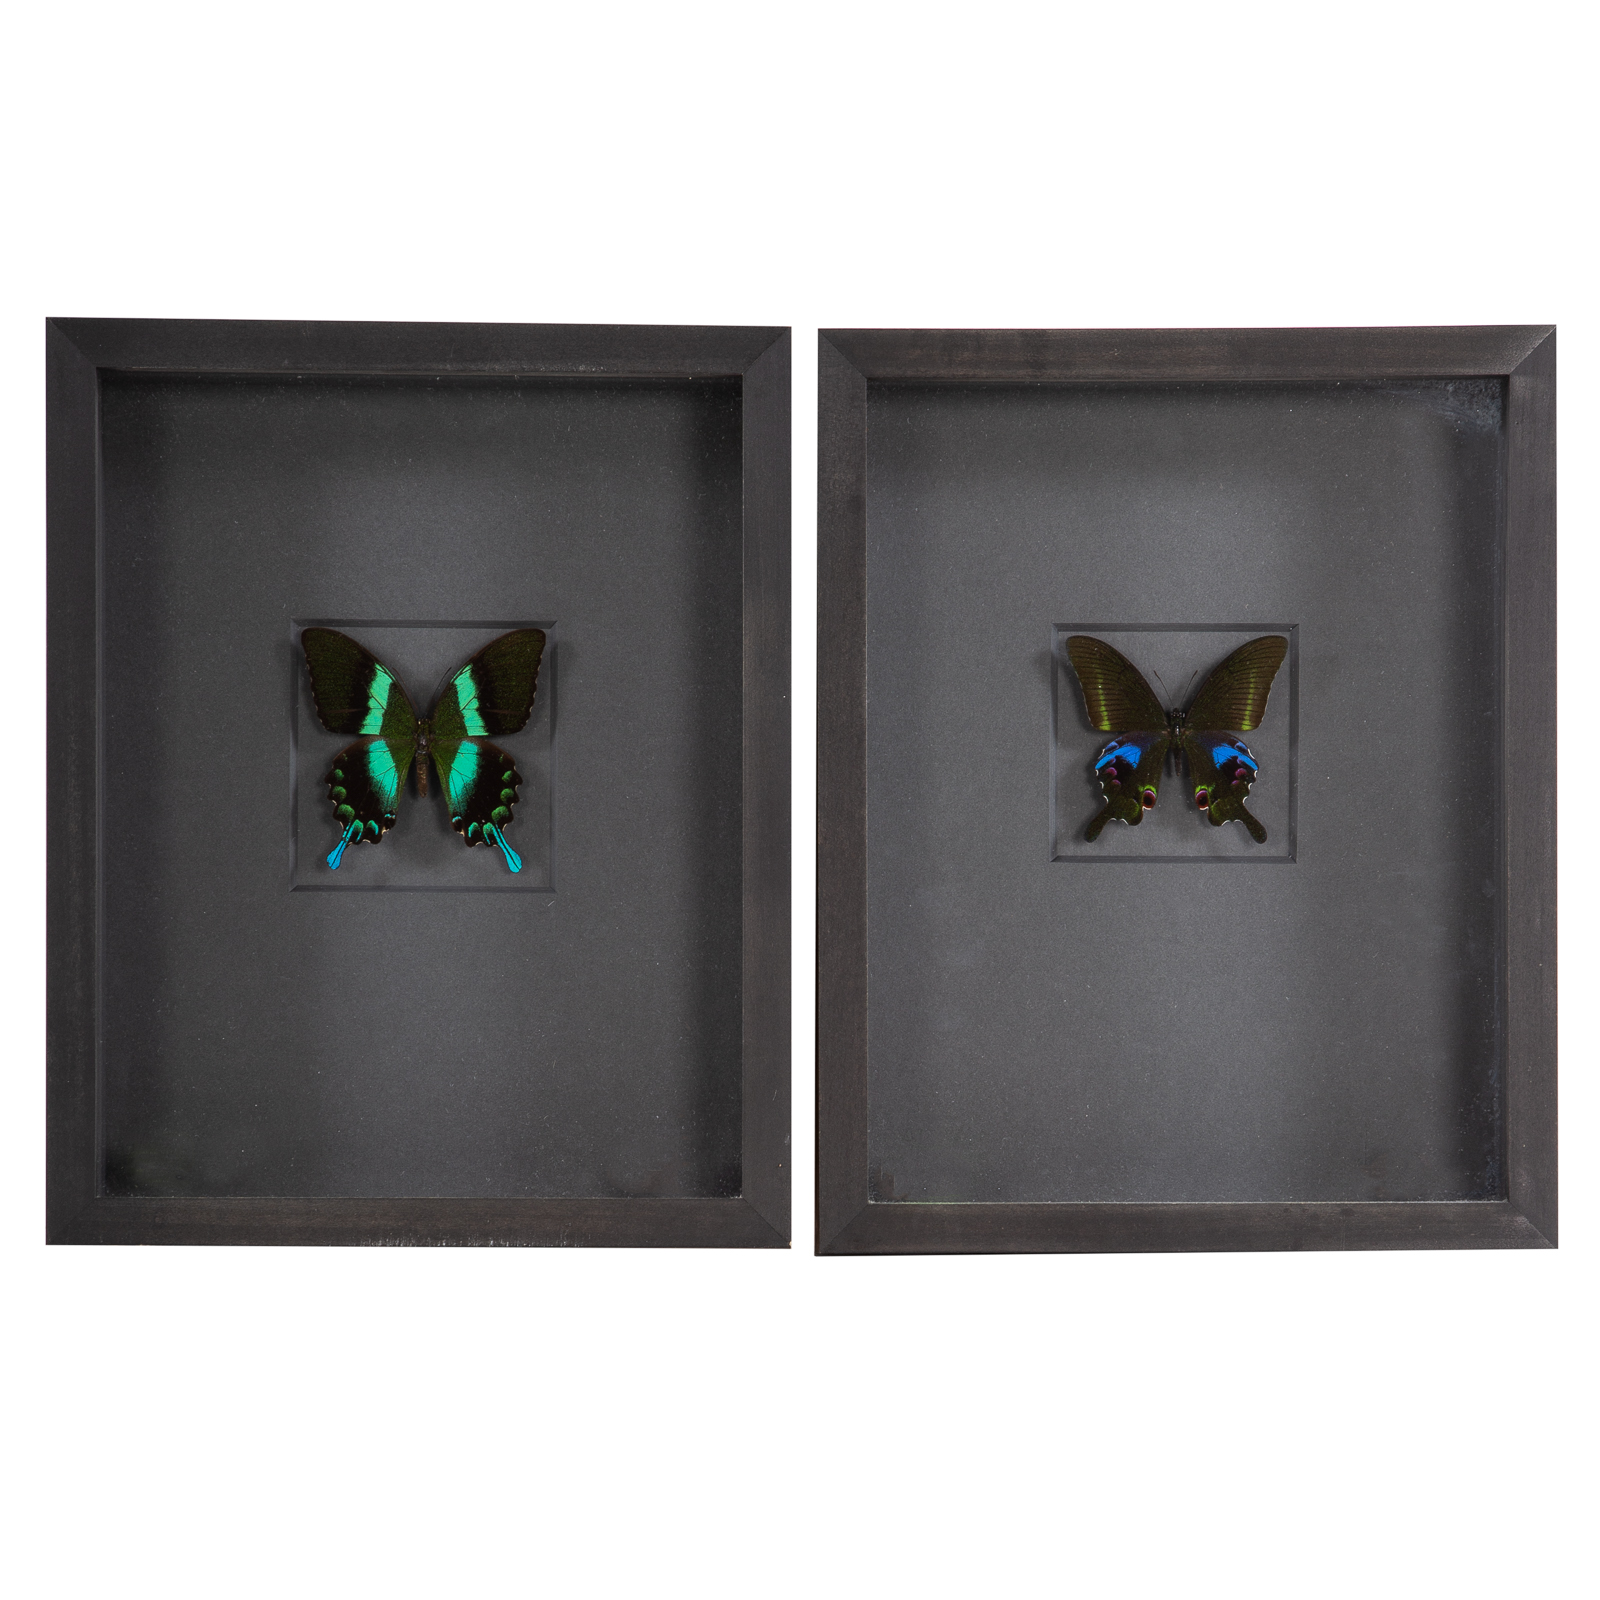 TWO FRAMED BUTTERFLIES 1) "Lime